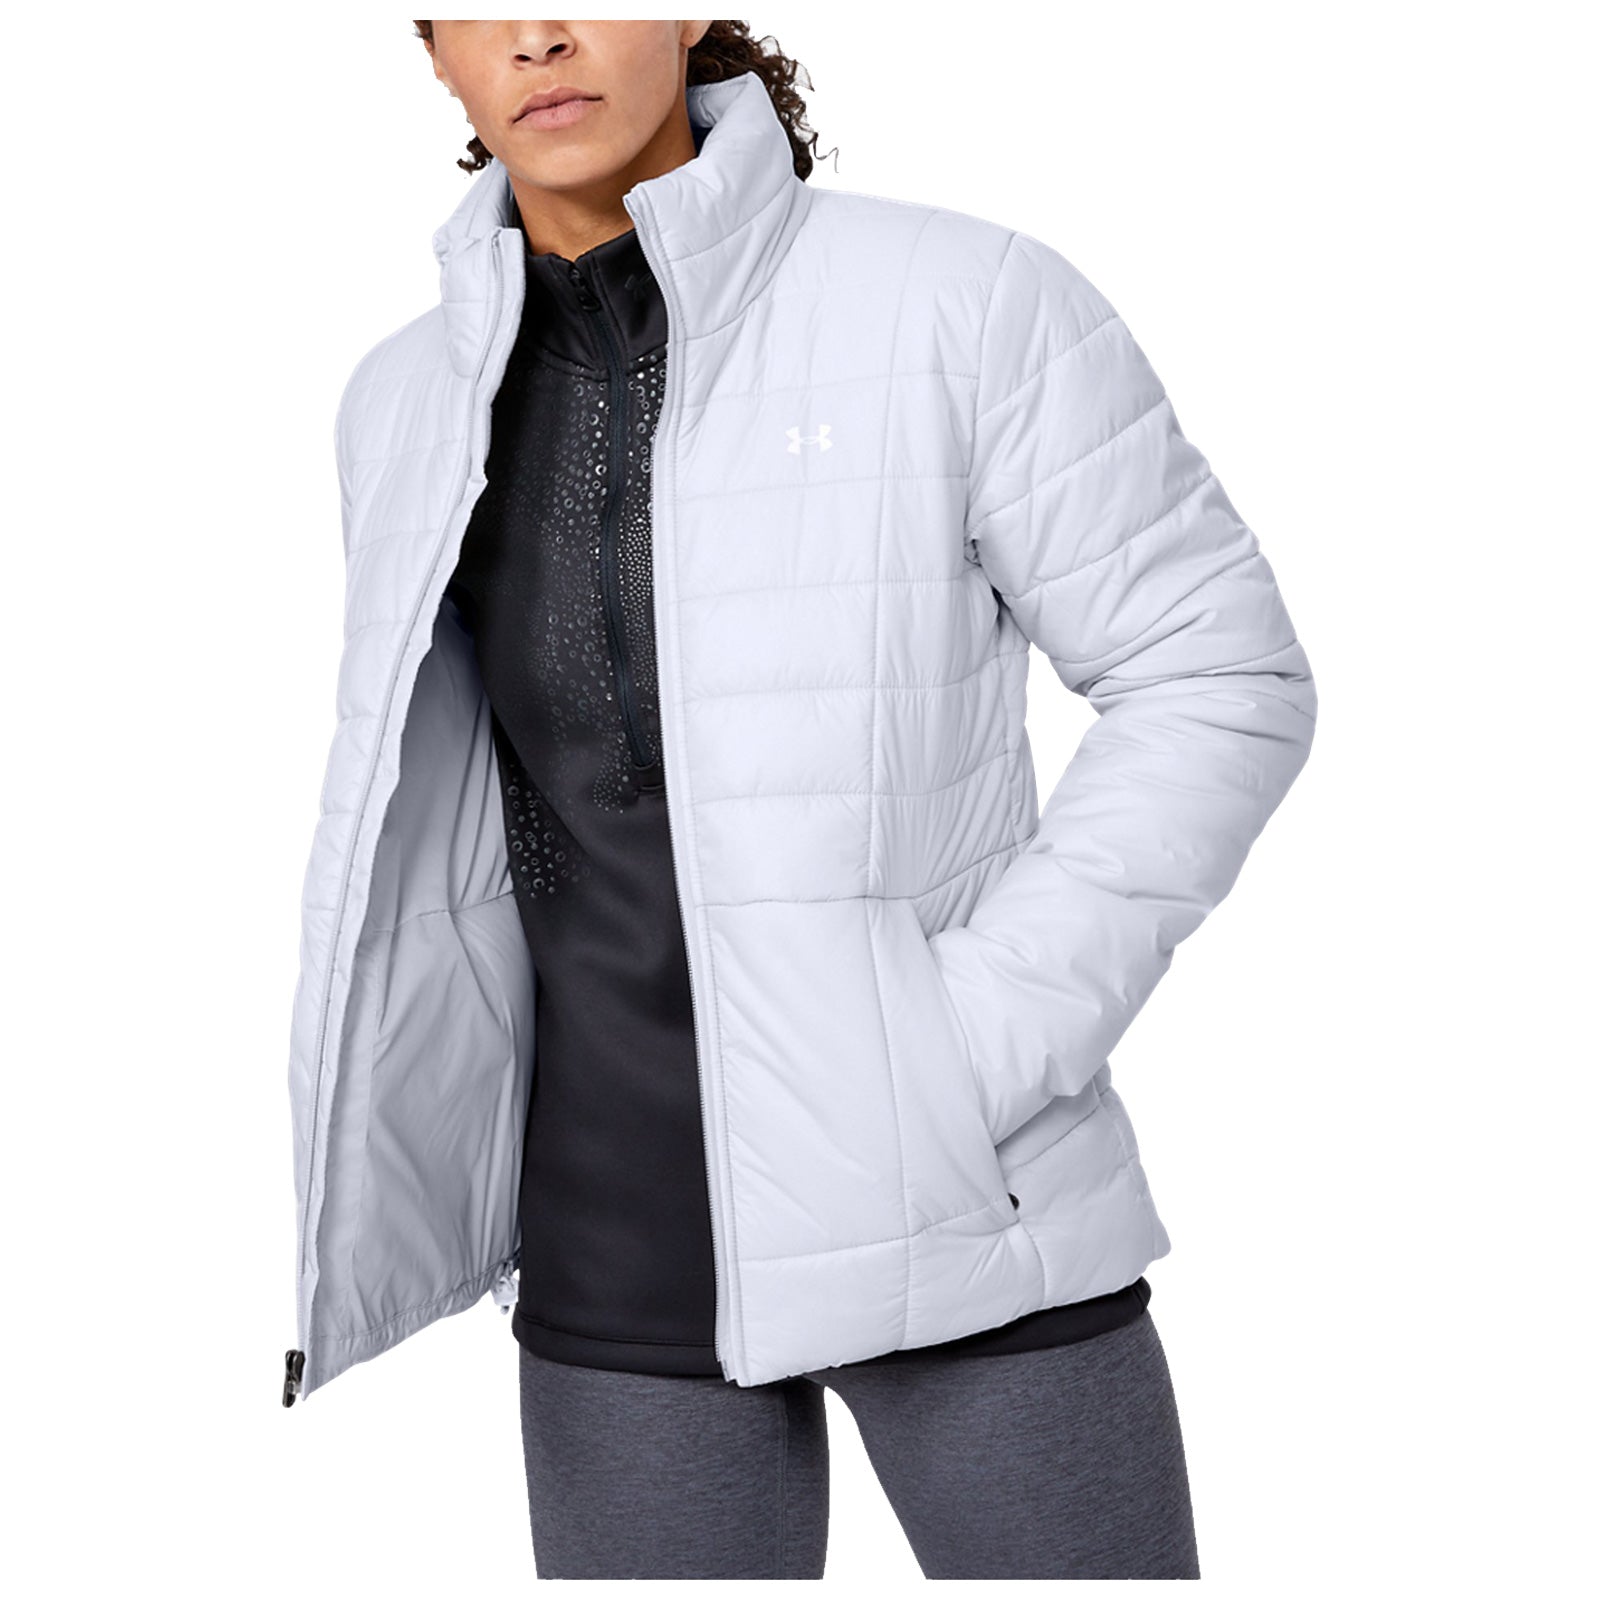 Under Armour Ladies ColdGear Infrared Insulated Jacket